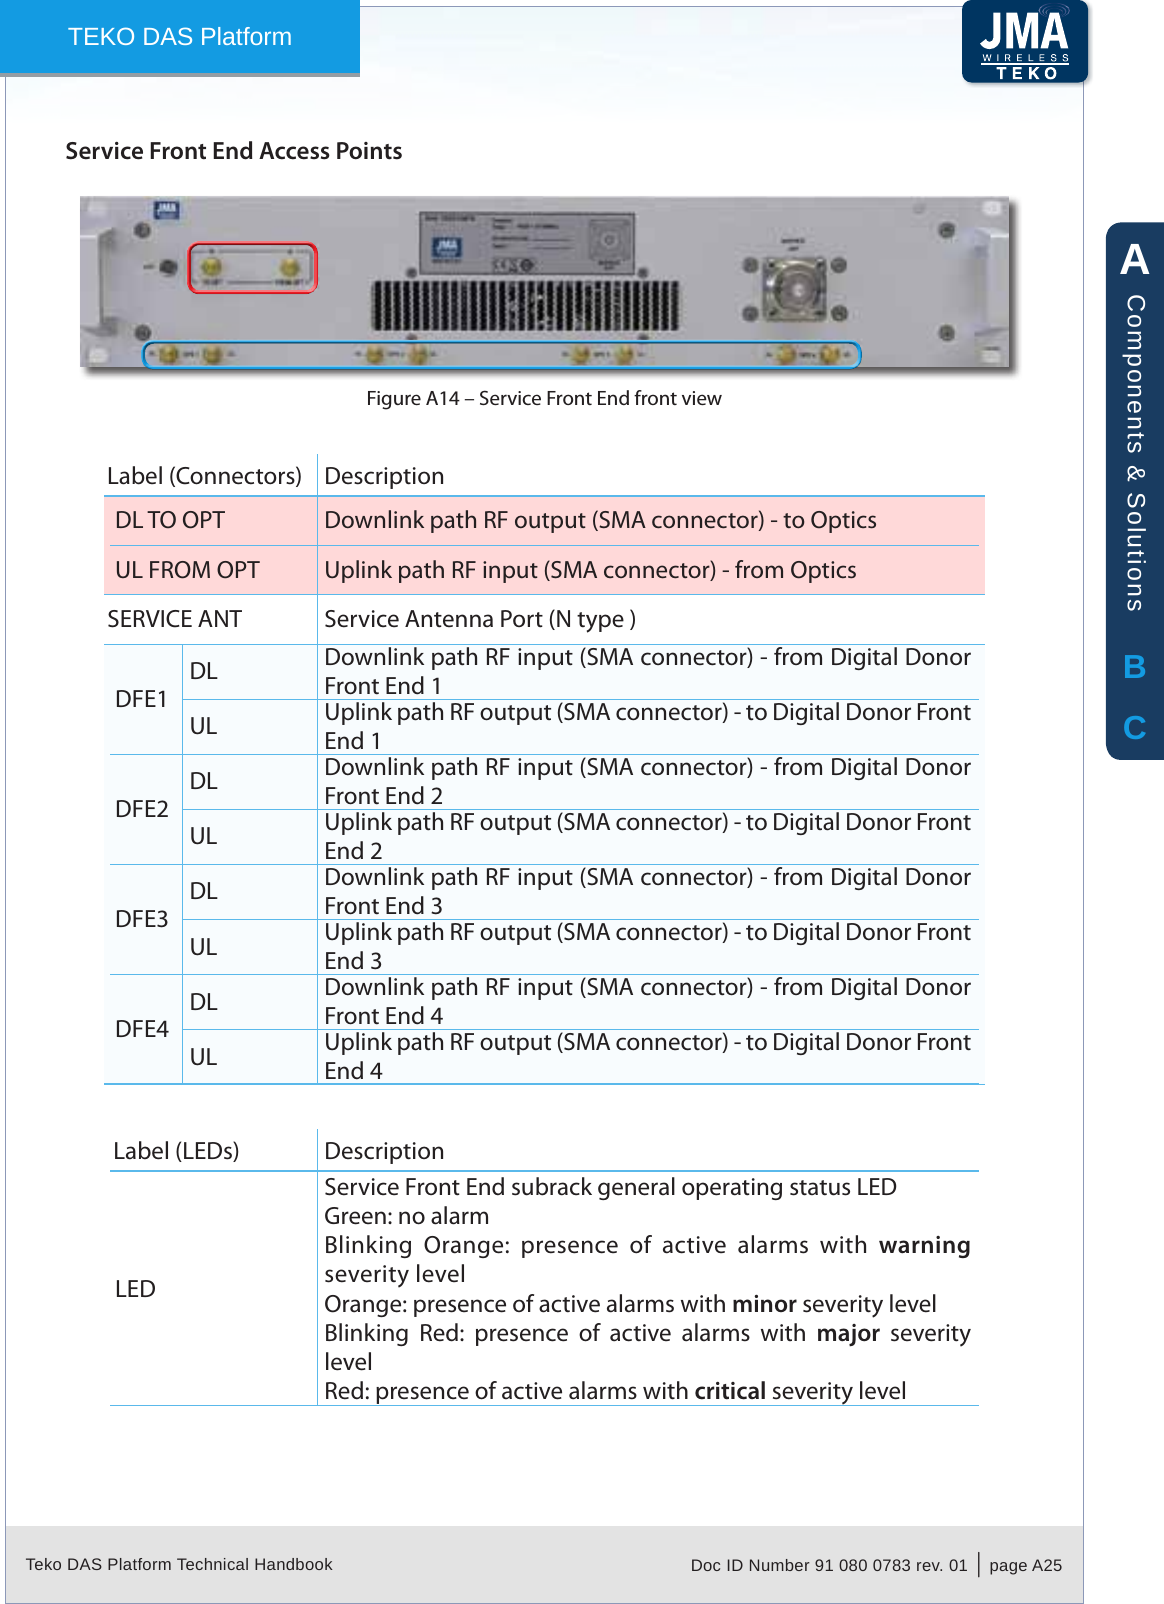 Teko DAS Platform Technical Handbook Doc ID Number 91 080 0783 rev. 01  |  page A25TEKO DAS PlatformService Front End Access PointsService Front End front viewFigure A14 – Label (Connectors) DescriptionDL TO OPT Downlink path RF output (SMA connector) - to OpticsUL FROM OPT Uplink path RF input (SMA connector) - from OpticsSERVICE ANT Service Antenna Port (N type )DFE1DL Downlink path RF input (SMA connector) - from Digital Donor Front End 1UL Uplink path RF output (SMA connector) - to Digital Donor Front End 1DFE2DL Downlink path RF input (SMA connector) - from Digital Donor Front End 2UL Uplink path RF output (SMA connector) - to Digital Donor Front End 2DFE3DL Downlink path RF input (SMA connector) - from Digital Donor Front End 3UL Uplink path RF output (SMA connector) - to Digital Donor Front End 3DFE4DL Downlink path RF input (SMA connector) - from Digital Donor Front End 4UL Uplink path RF output (SMA connector) - to Digital Donor Front End 4Label (LEDs) DescriptionLEDService Front End subrack general operating status LEDGreen: no alarmBlinking  Orange:  presence  of  active  alarms  with  warning severity levelOrange: presence of active alarms with minor severity levelBlinking  Red:  presence  of  active  alarms  with  major  severity levelRed: presence of active alarms with critical severity levelABCComponents &amp; Solutions